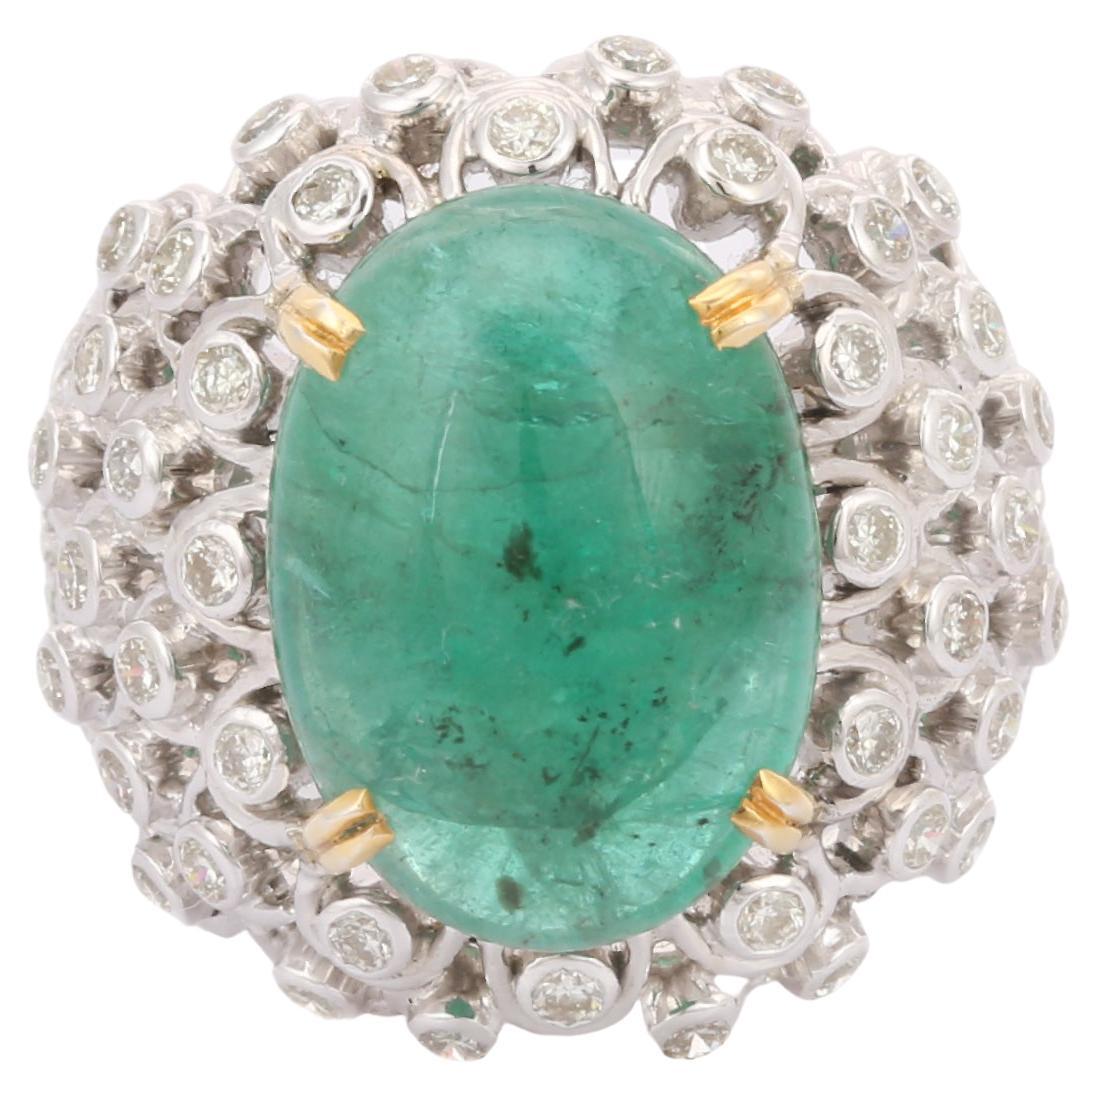 For Sale:  18kt Solid White Gold Estate Emerald Diamond Dome Ring For Women